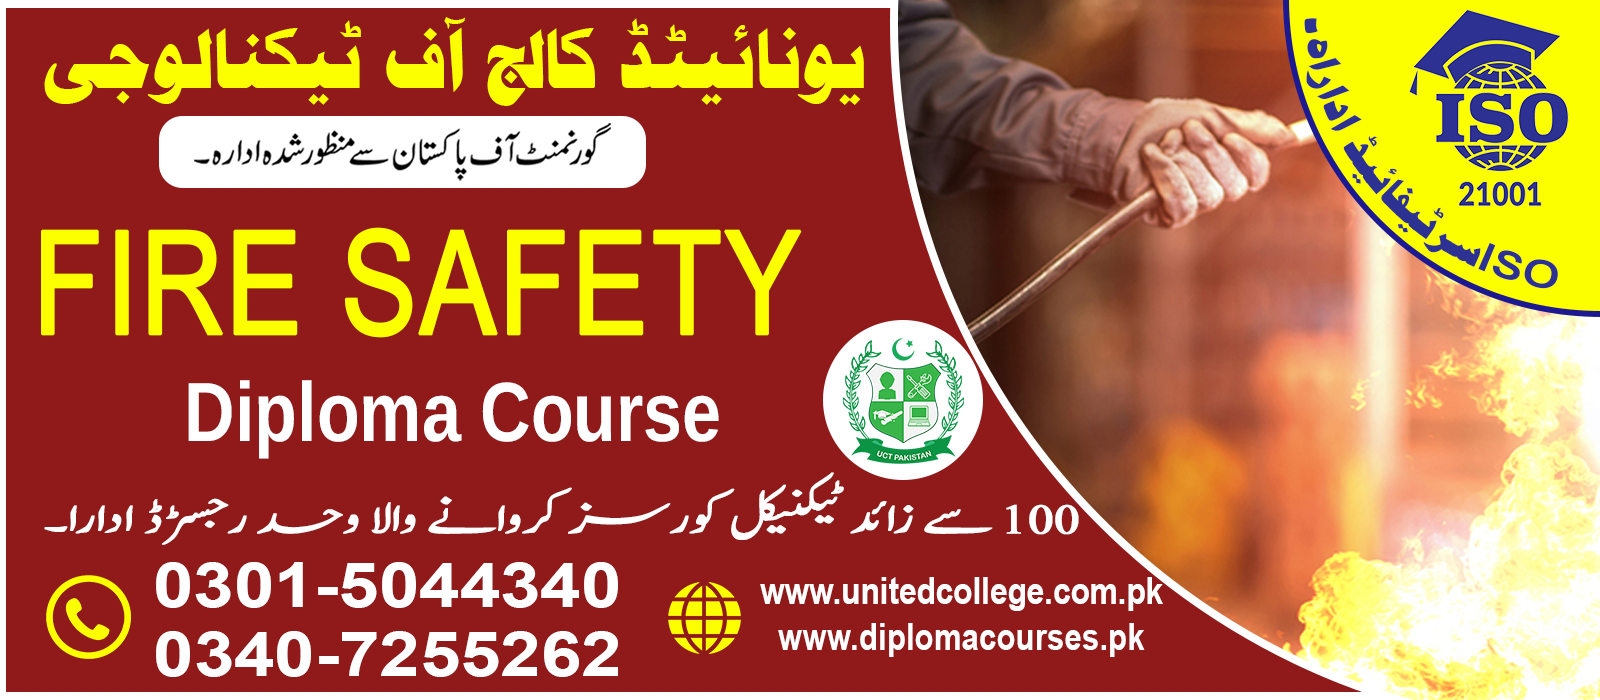 FIRE SAFETY COURSE